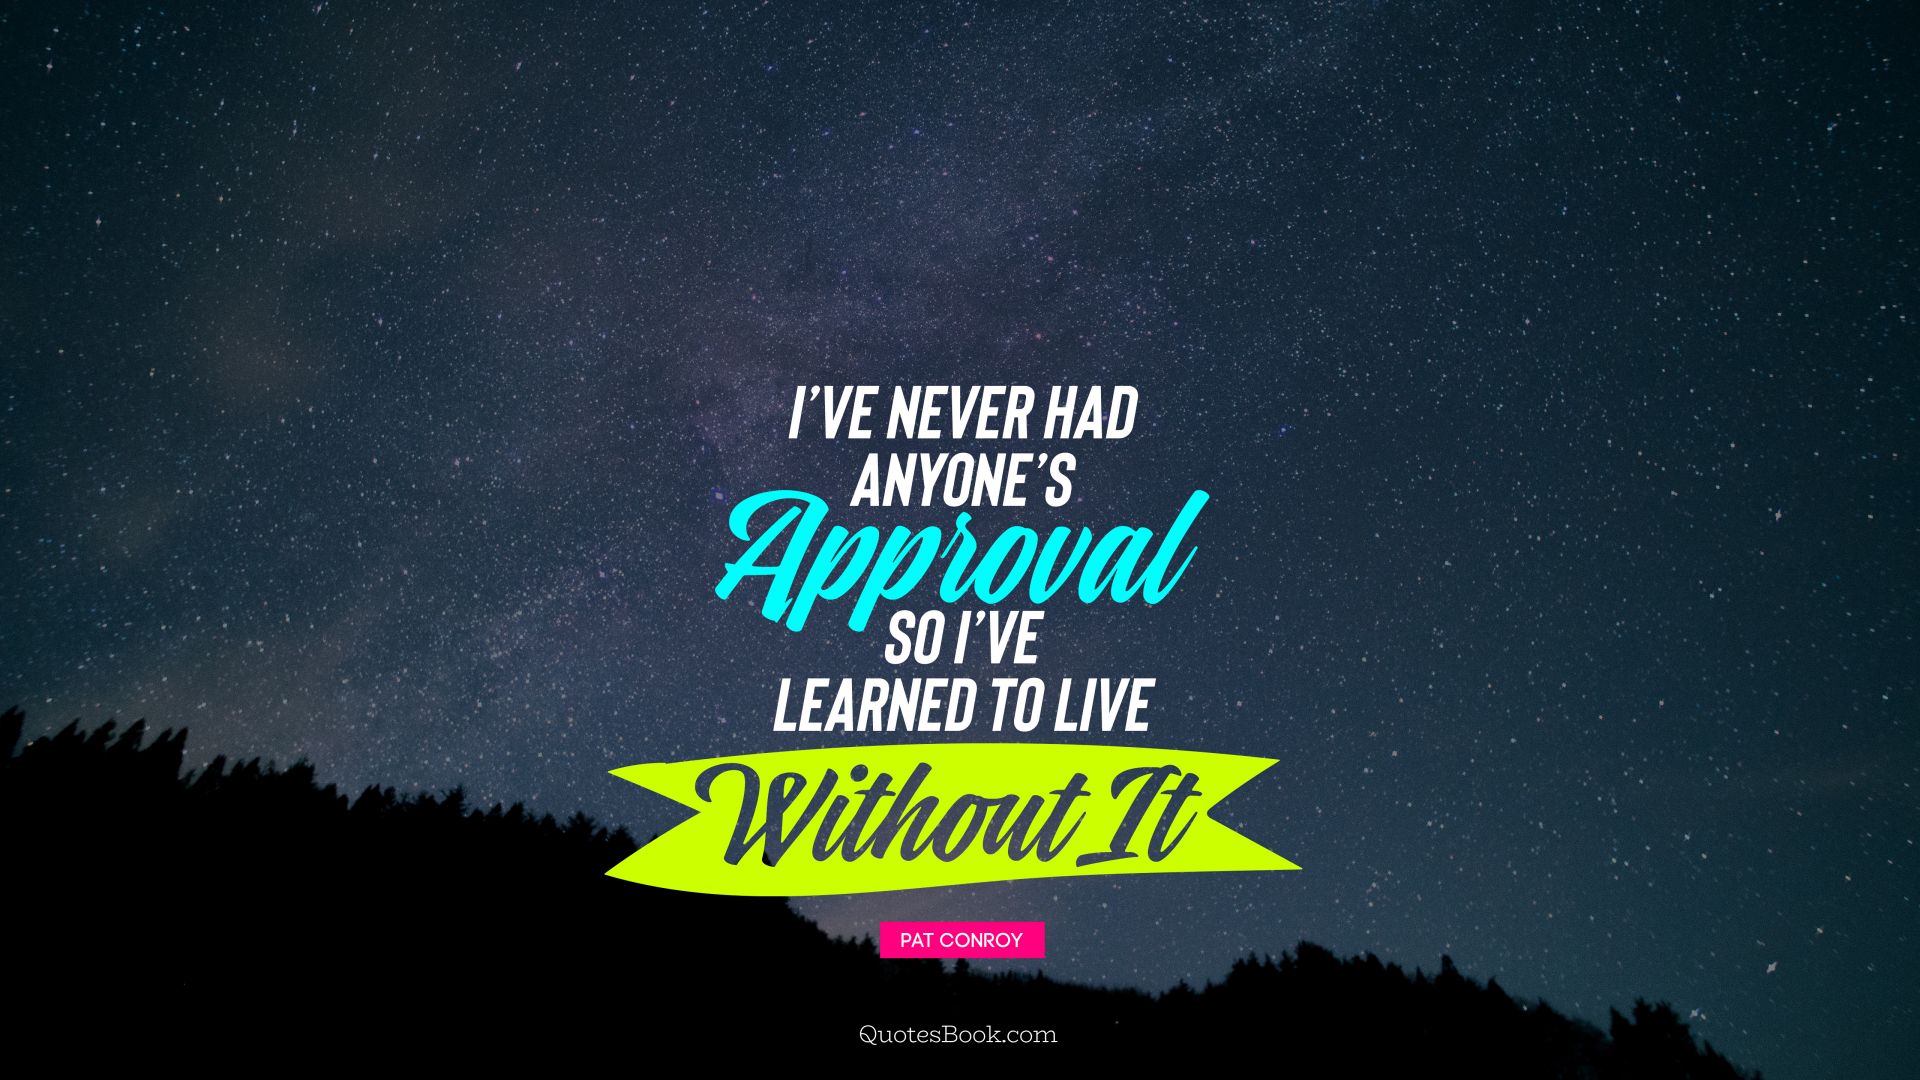 I’ve never had anyone’s approval, so I’ve learned to live without it. - Quote by Pat Conroy